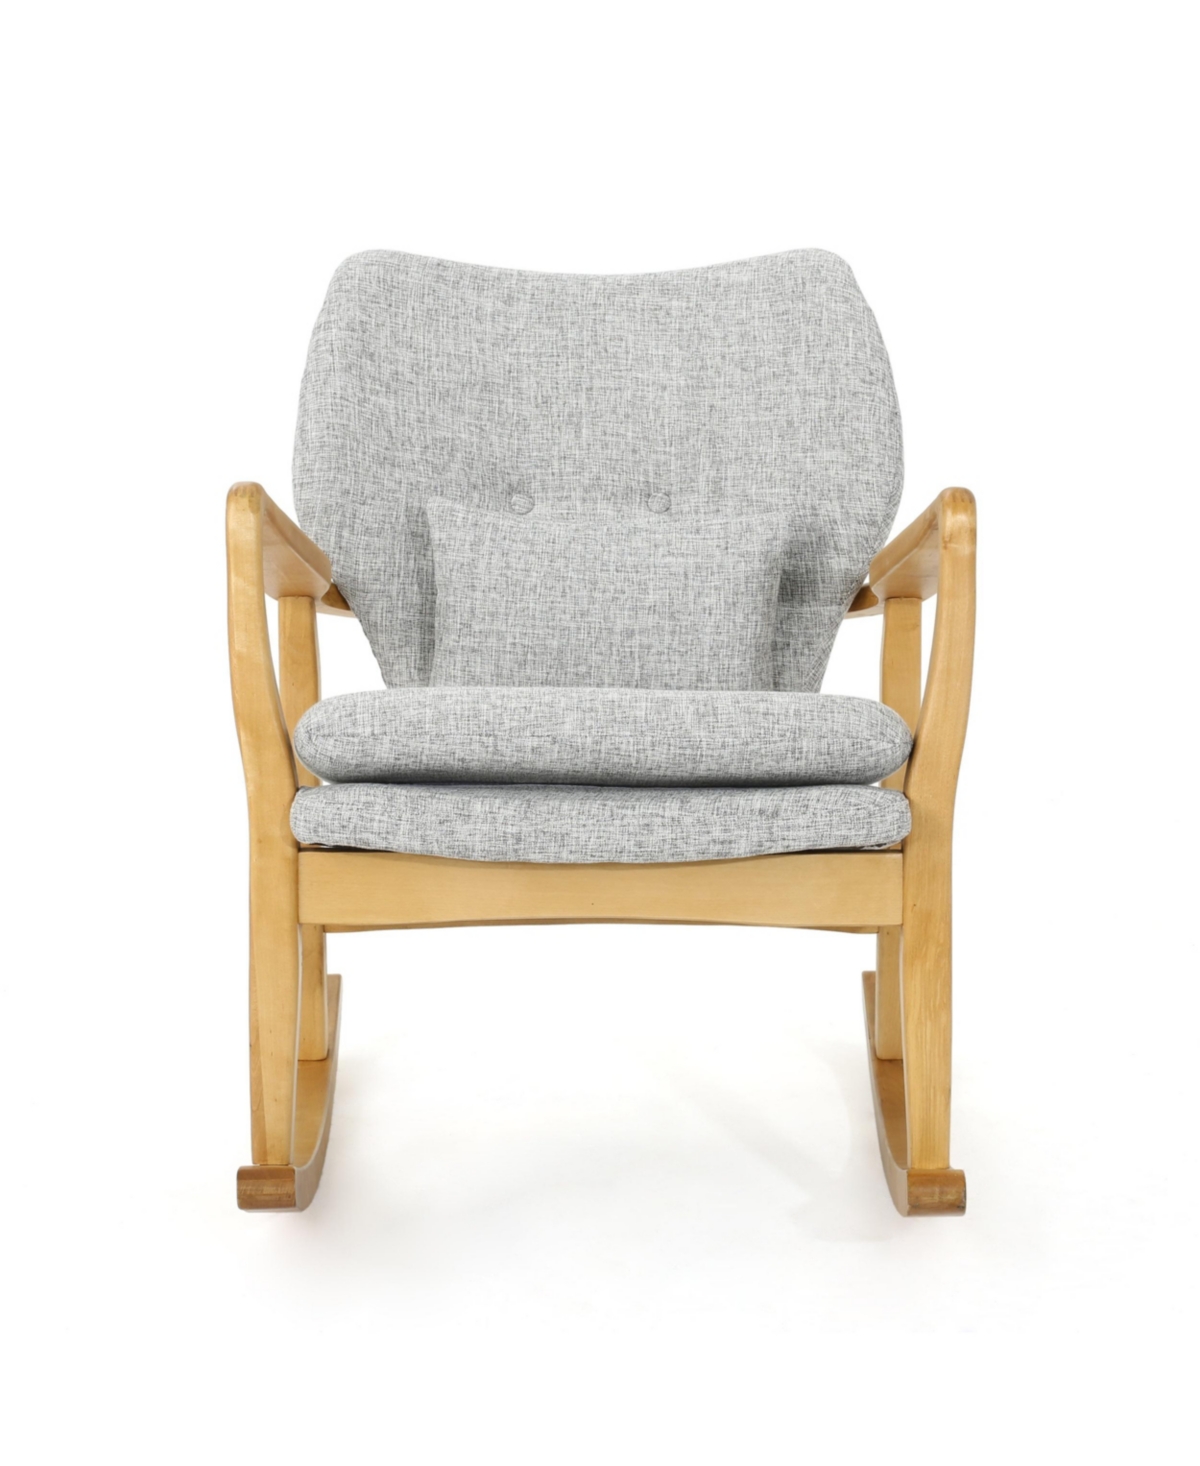 Noble House Benny Mid-century Modern Tufted Rocking Chair With Accent Pillow In Light Gray Tweed